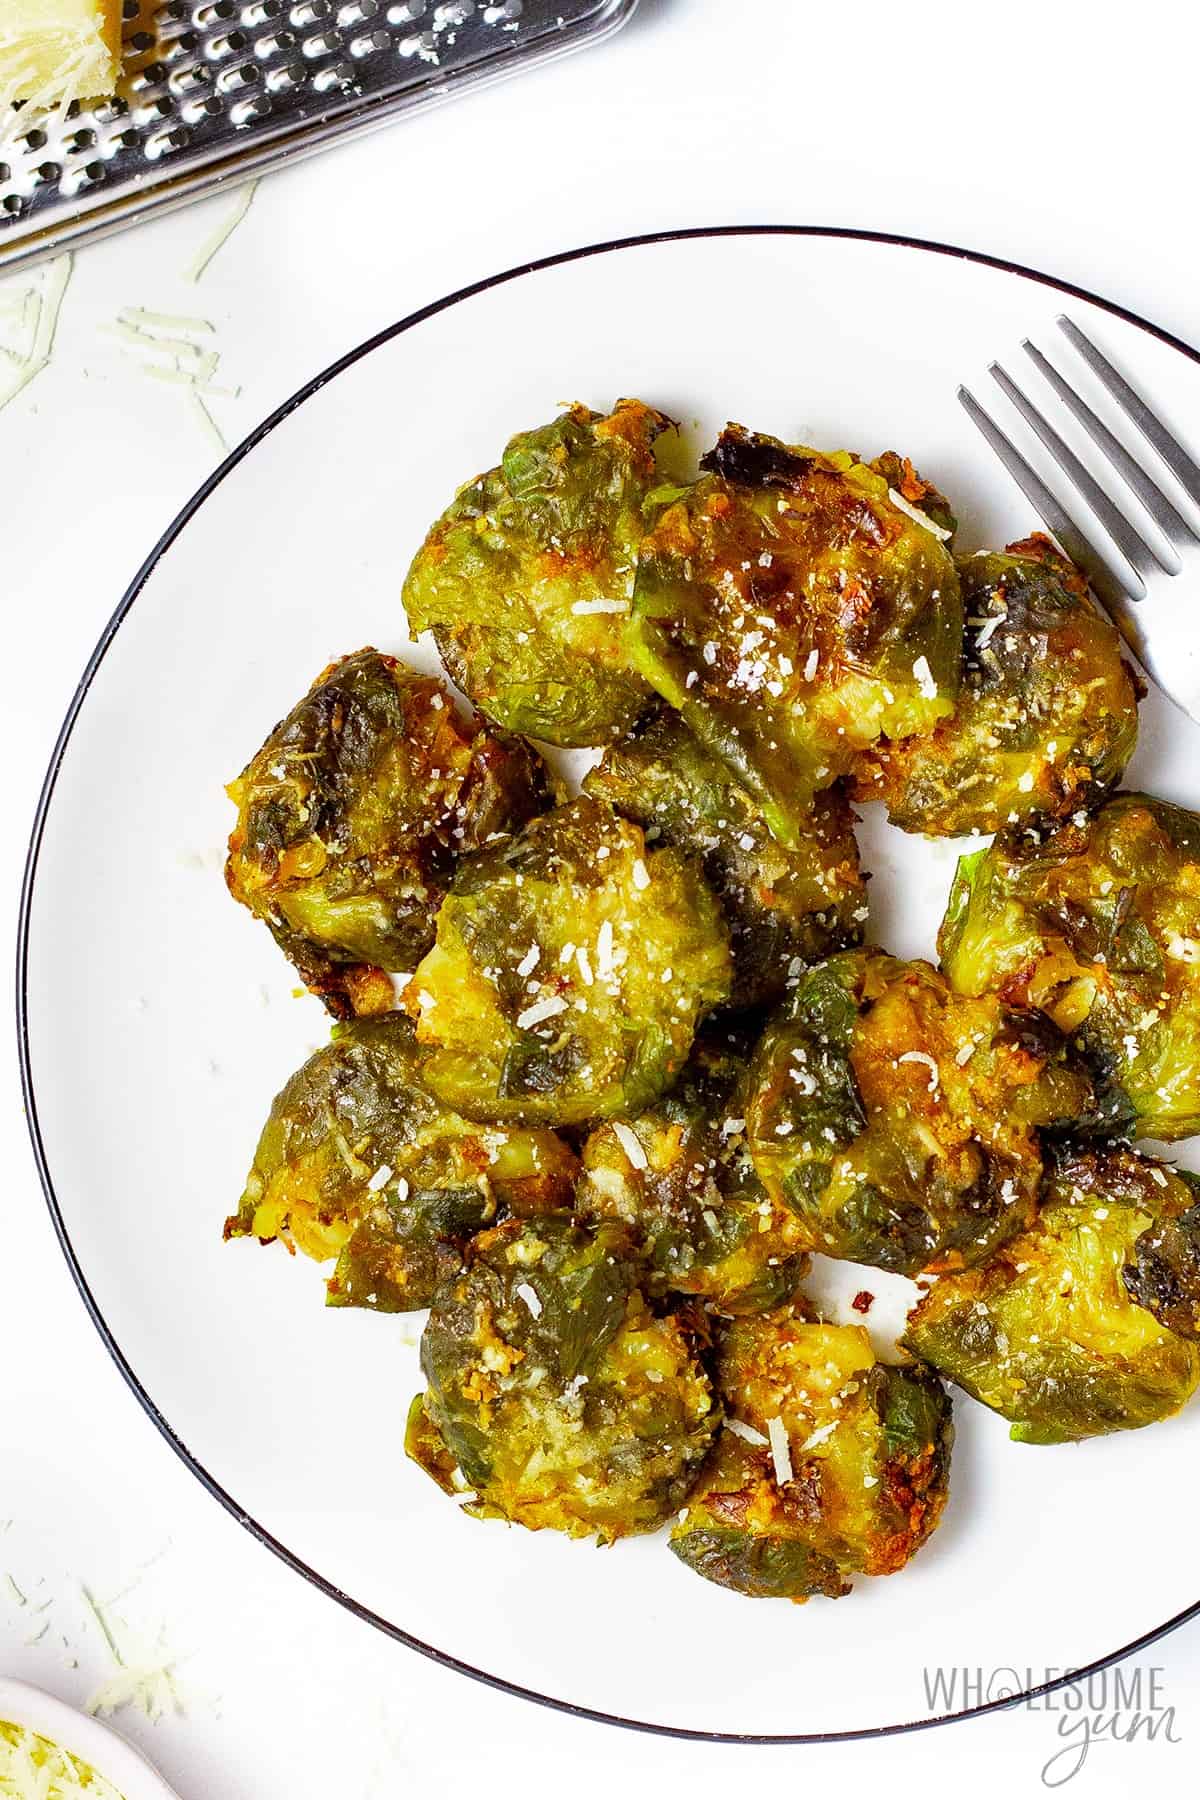 Crispy smashed brussels sprouts with parmesan on a plate.